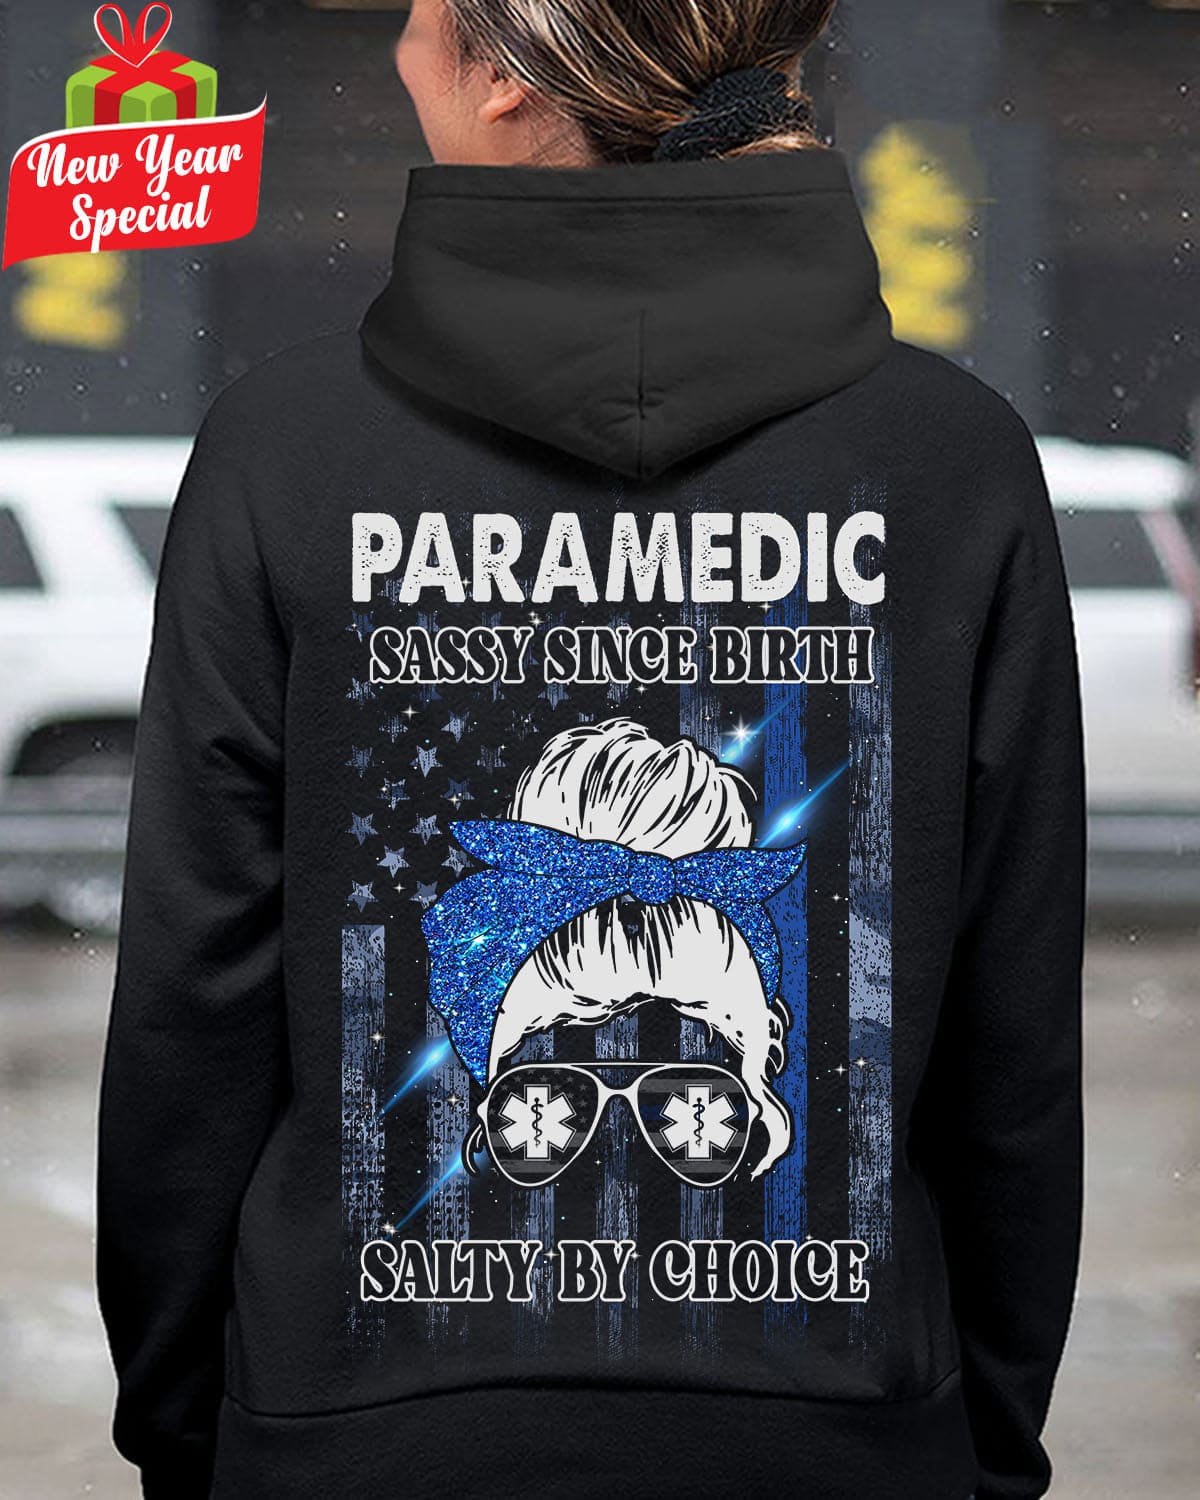 Paramedic sassy since birth, salty by choice - Gift for woman paramedic